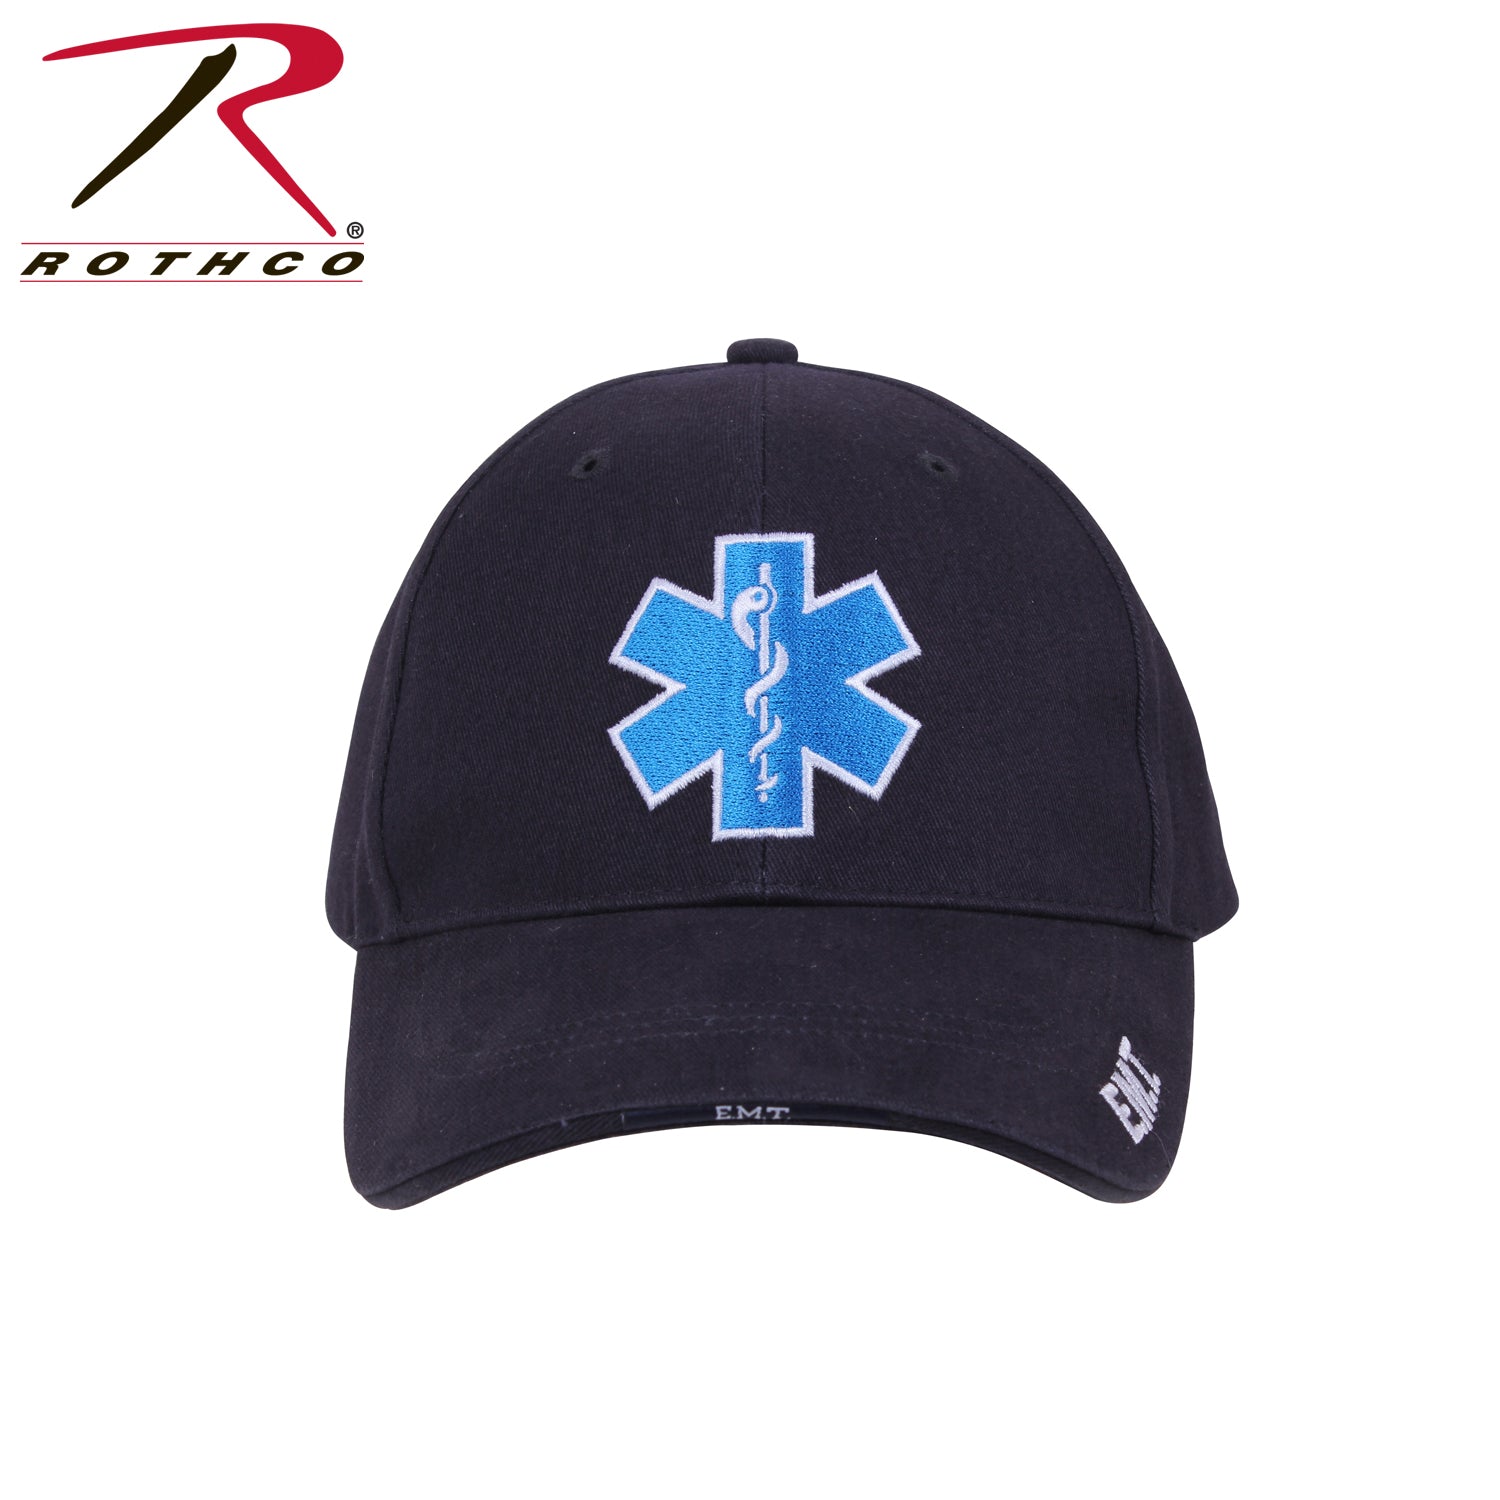 Rothco Deluxe Star of Life Low Profile Cap